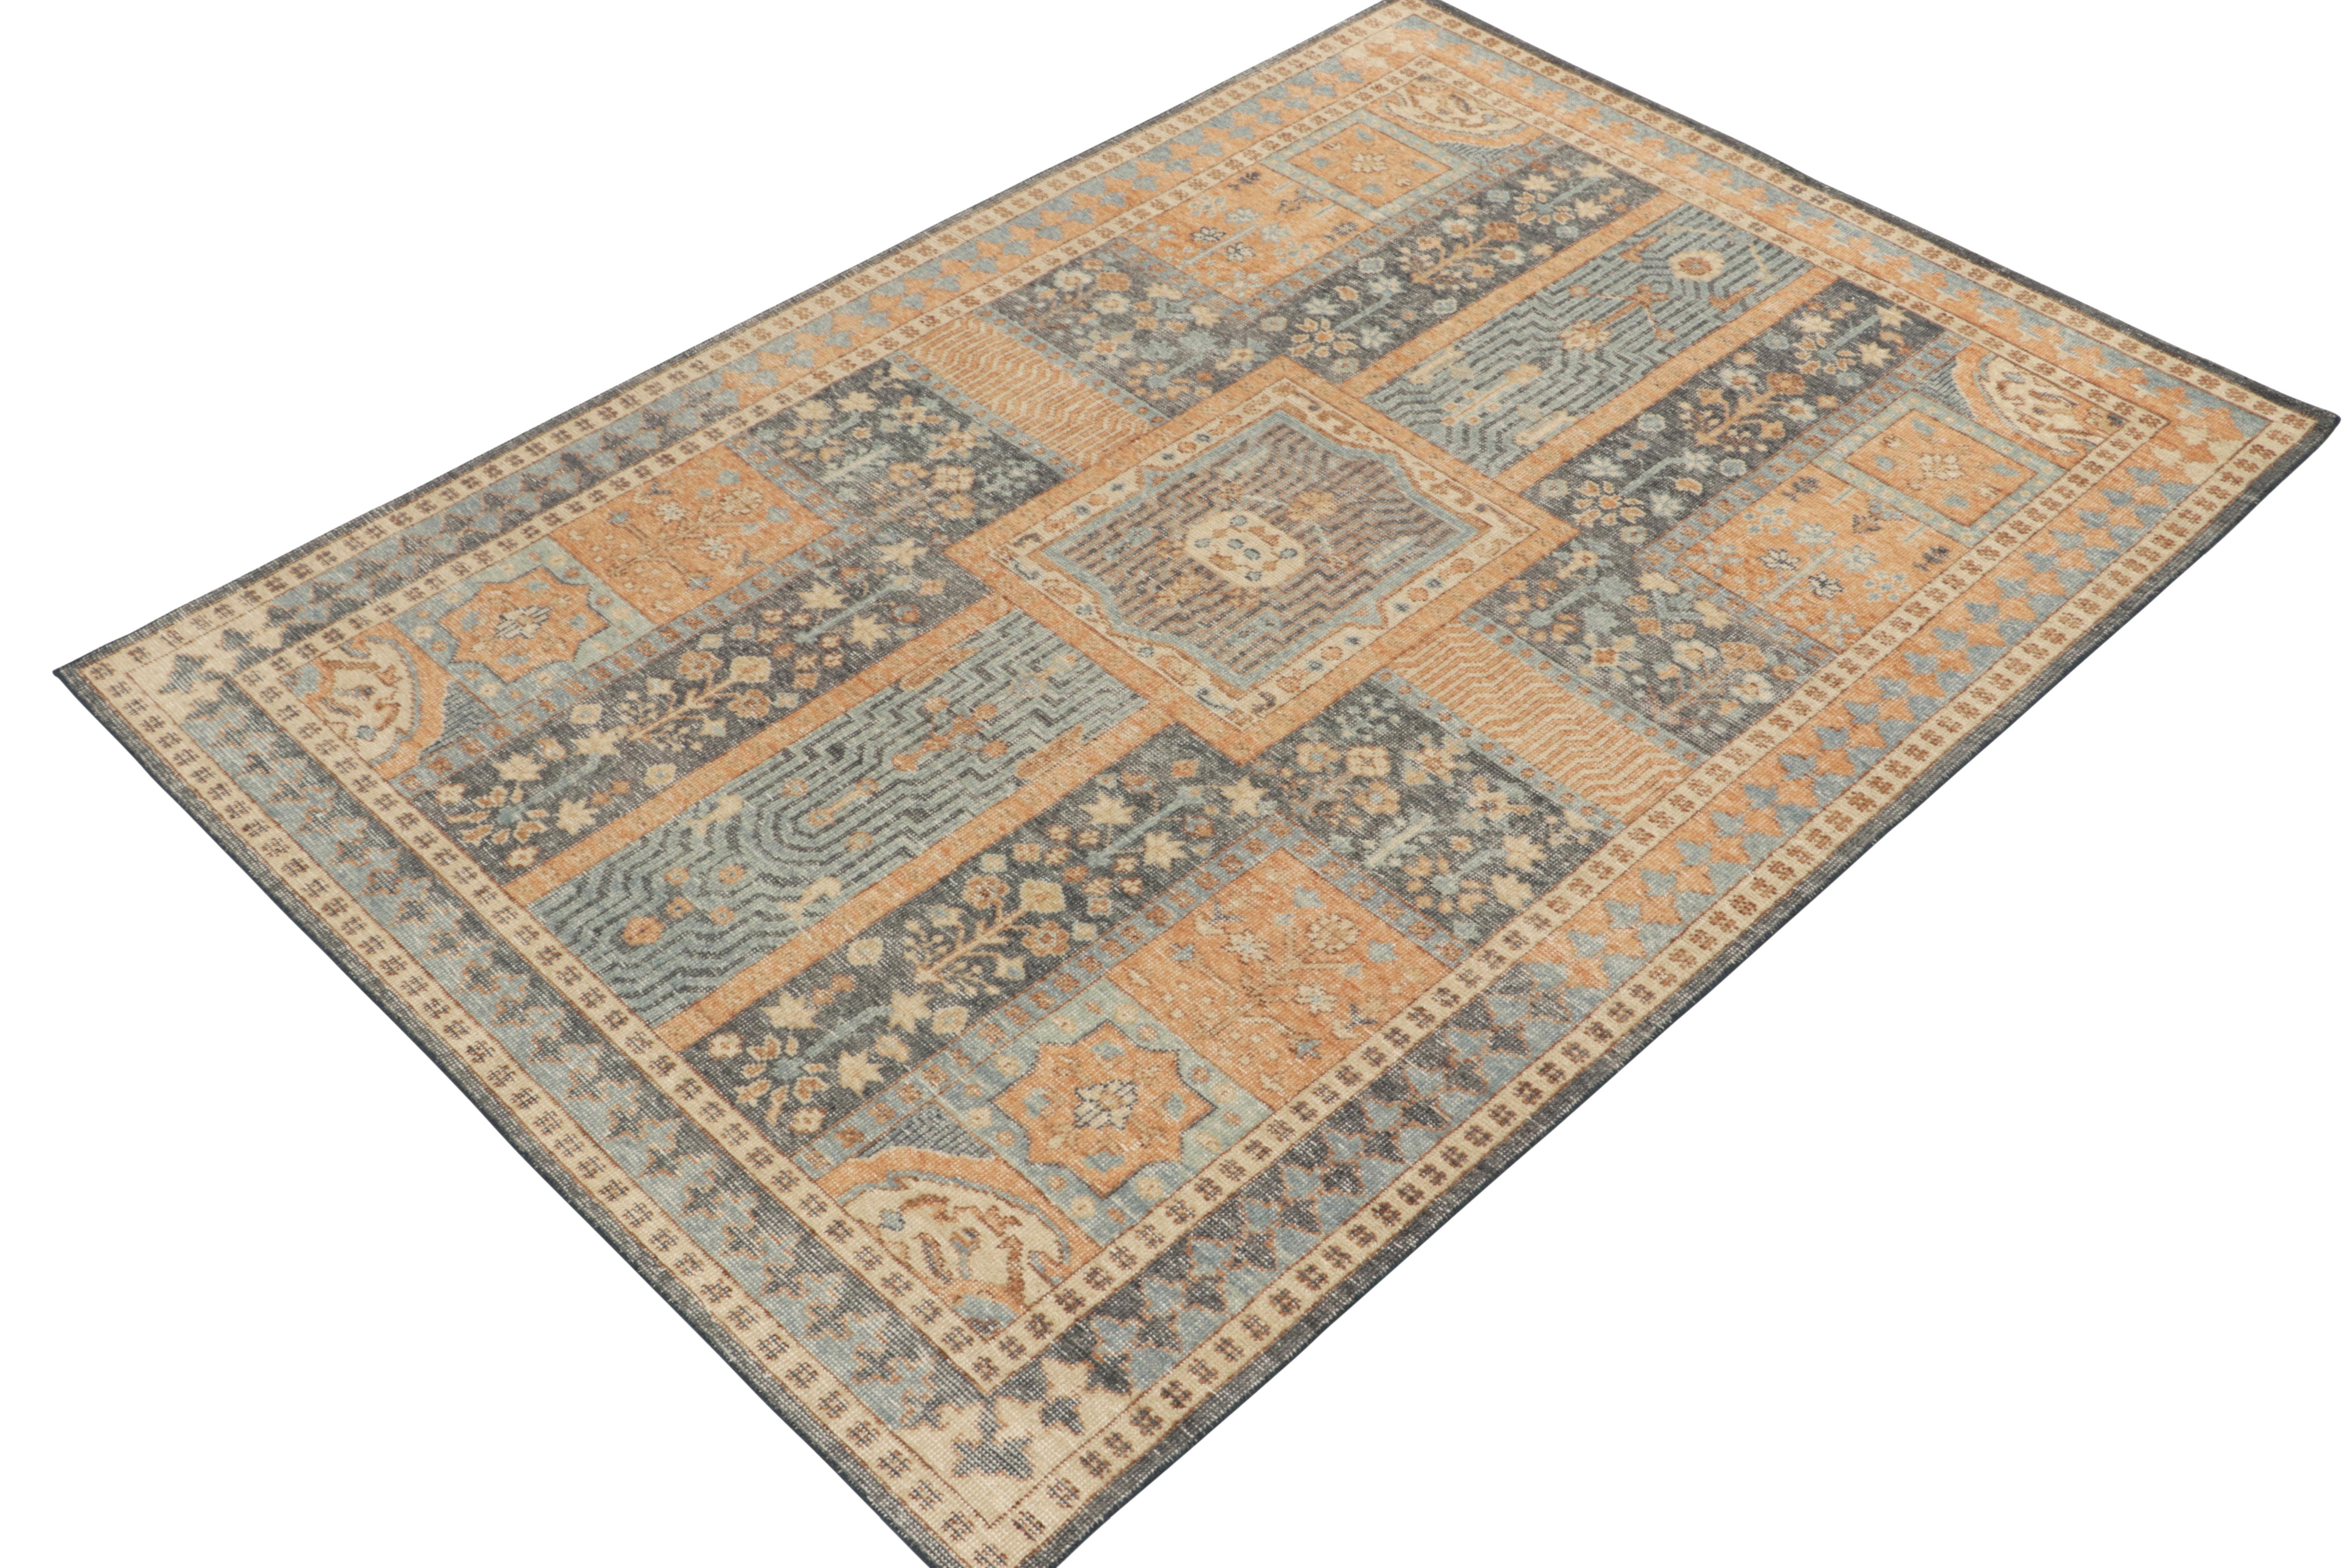 Indian Rug & Kilim's Antique Persian Style Distressed Rug in Blue, Gold Garden Pattern For Sale